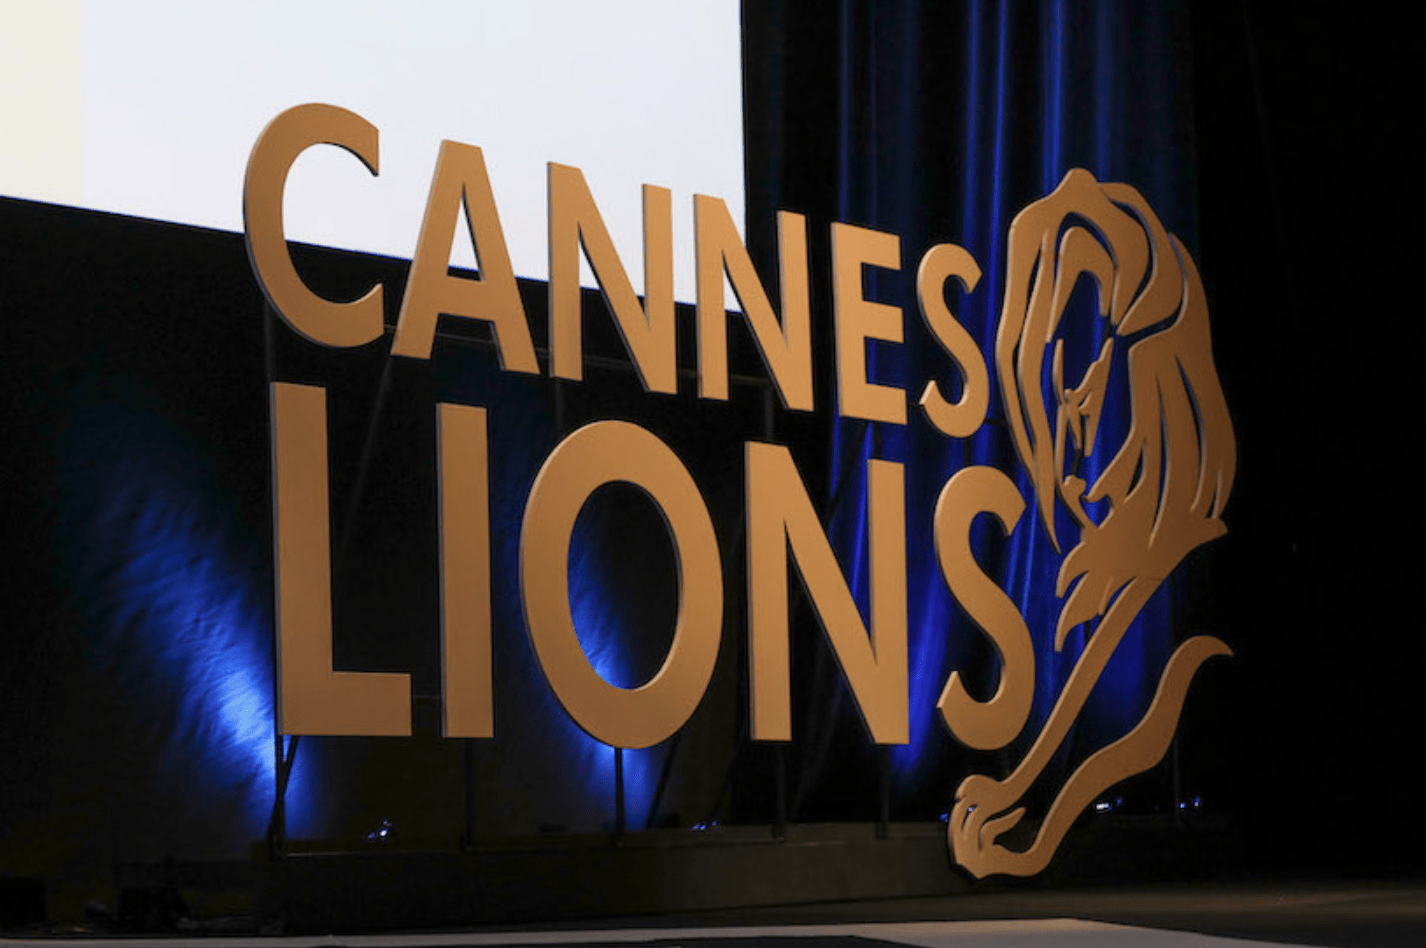 Photo of the Cannes Lions sign